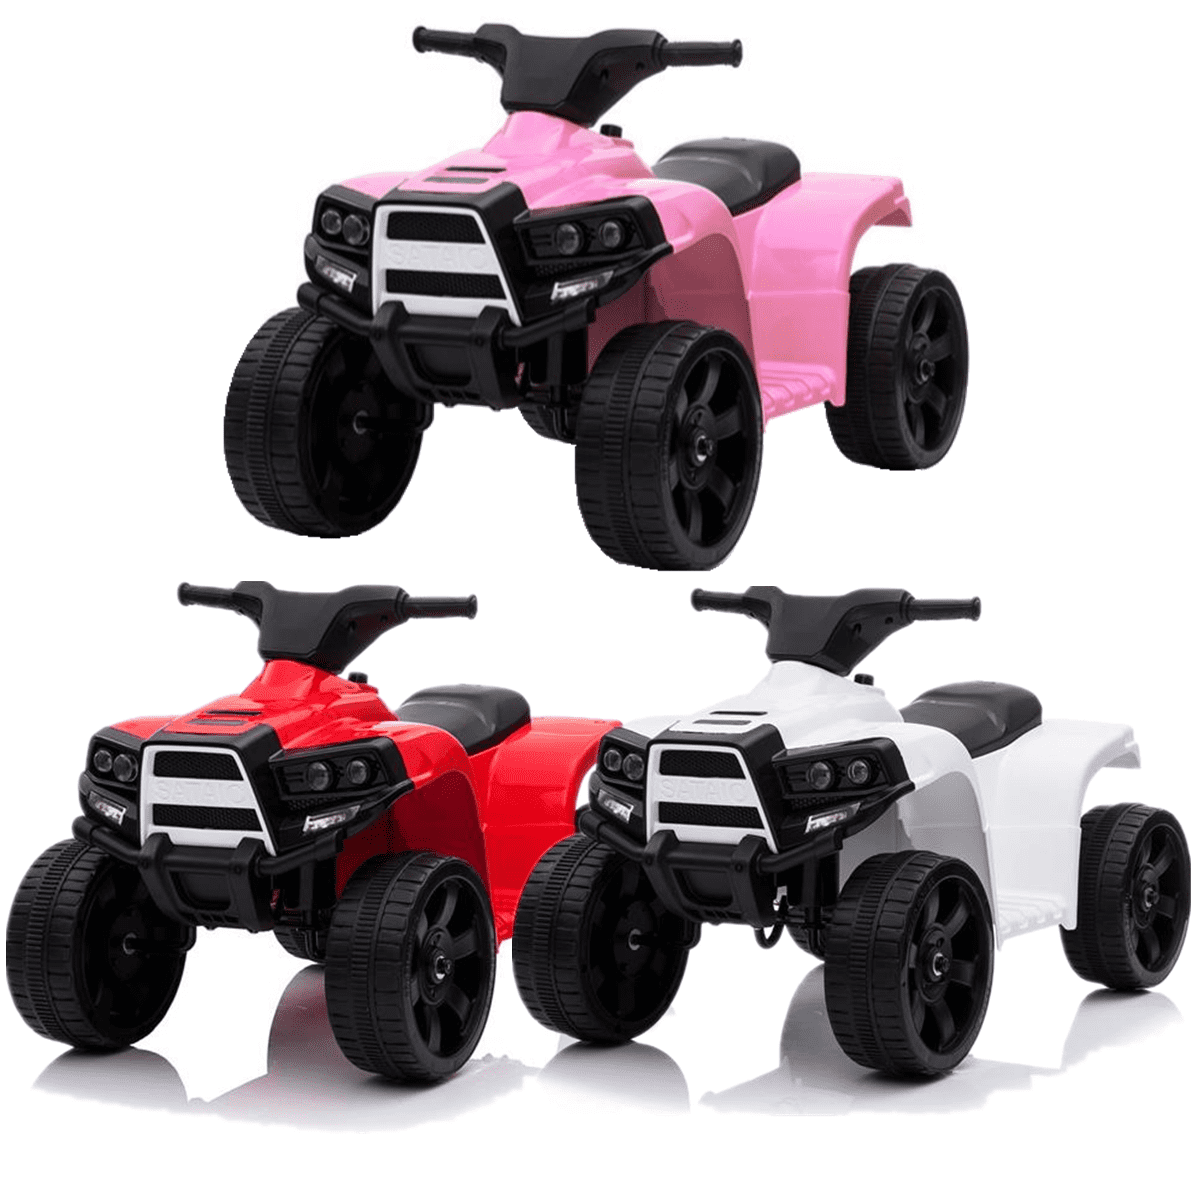 Details about   Kids Electric 4-Wheeler Ride On Car Toy w/ LED Headlights & Music & Radio Pink 